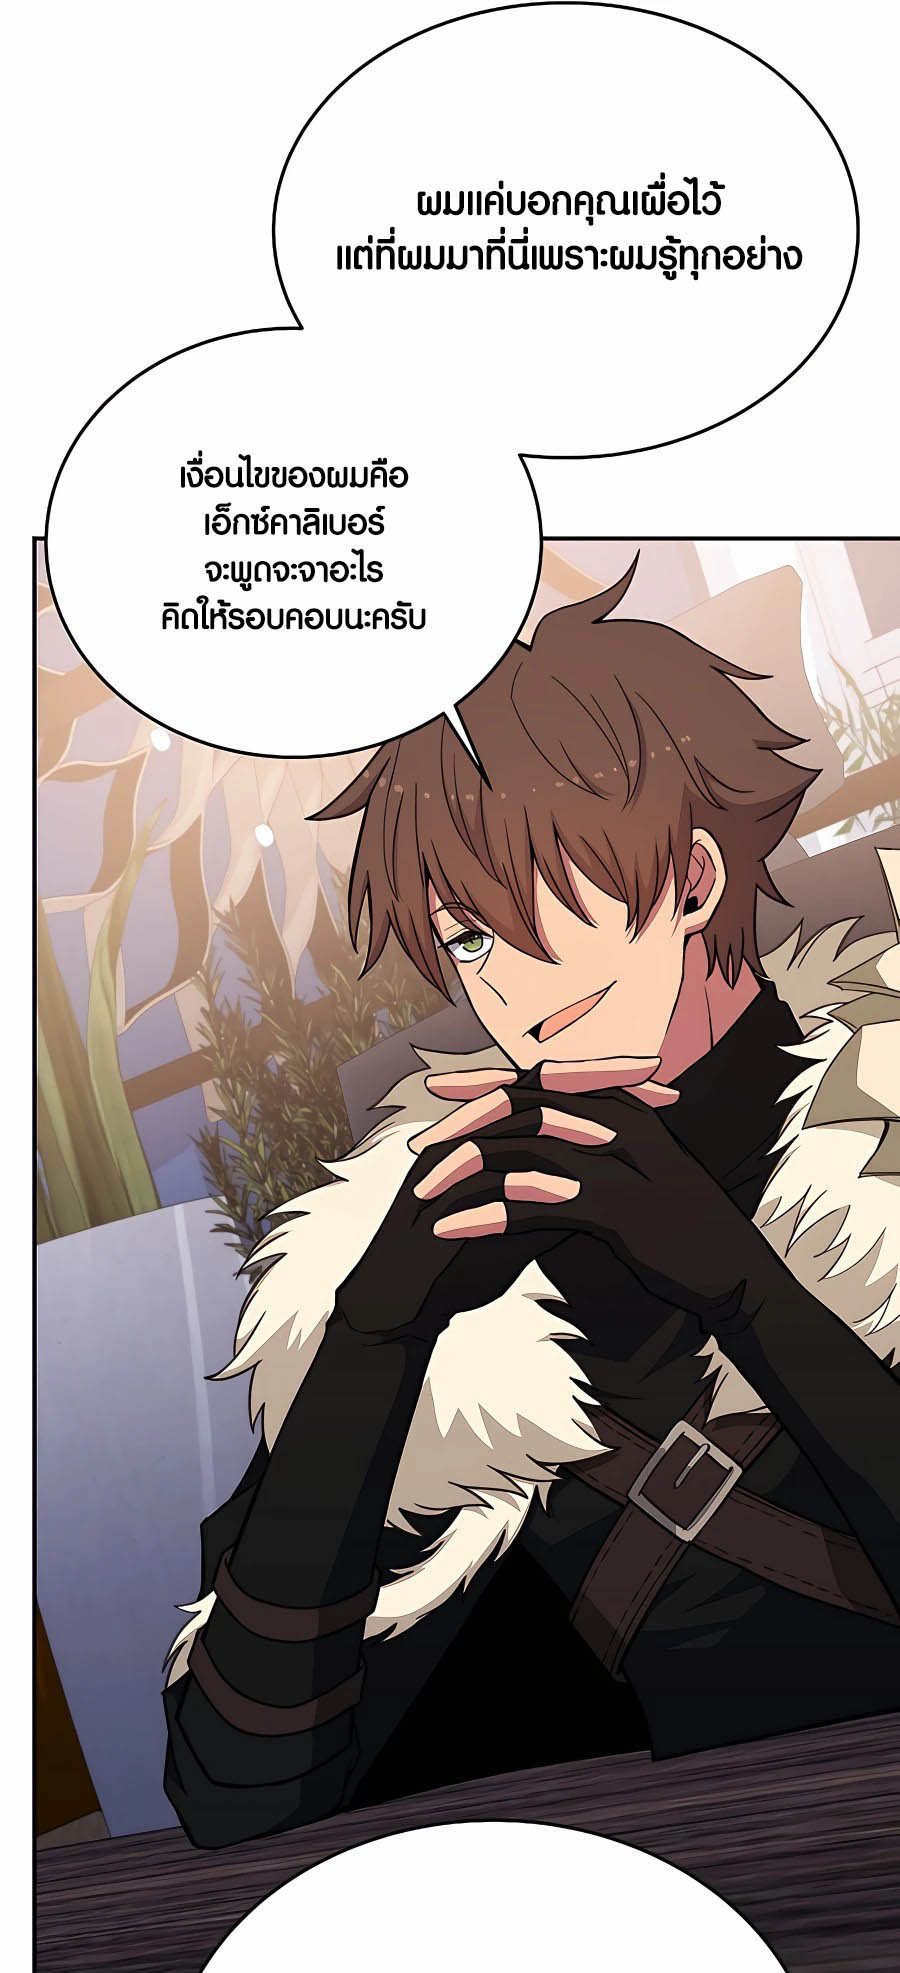 à¸­à¹ˆà¸²à¸™à¸¡à¸±à¸™à¸®à¸§à¸² à¹€à¸£à¸·à¹ˆà¸­à¸‡ The Part Time Land of the Gods 56 33